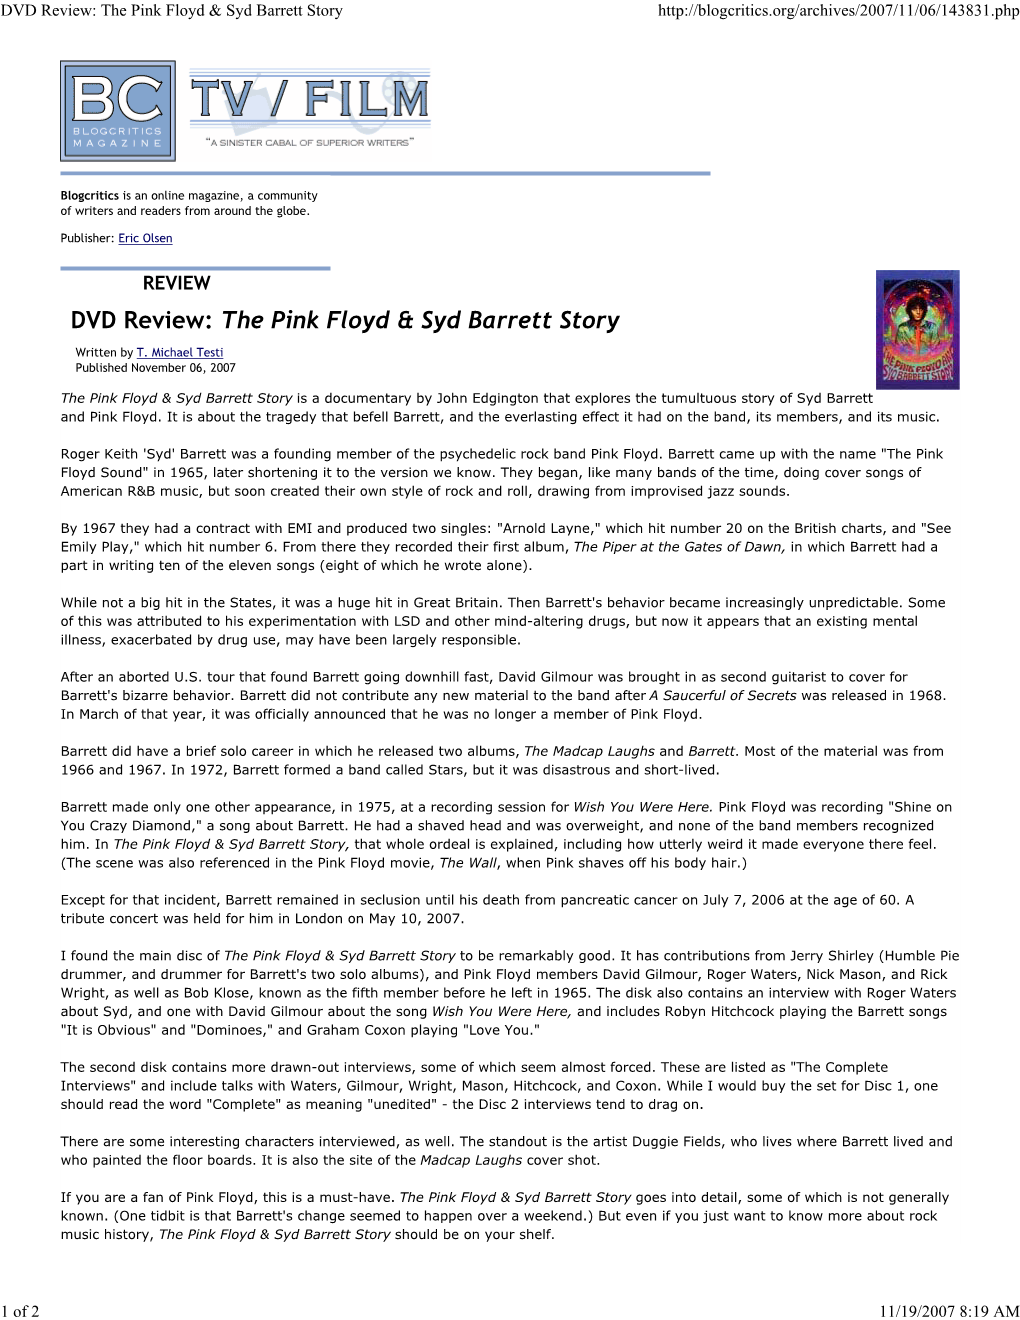 DVD Review: the Pink Floyd & Syd Barrett Story